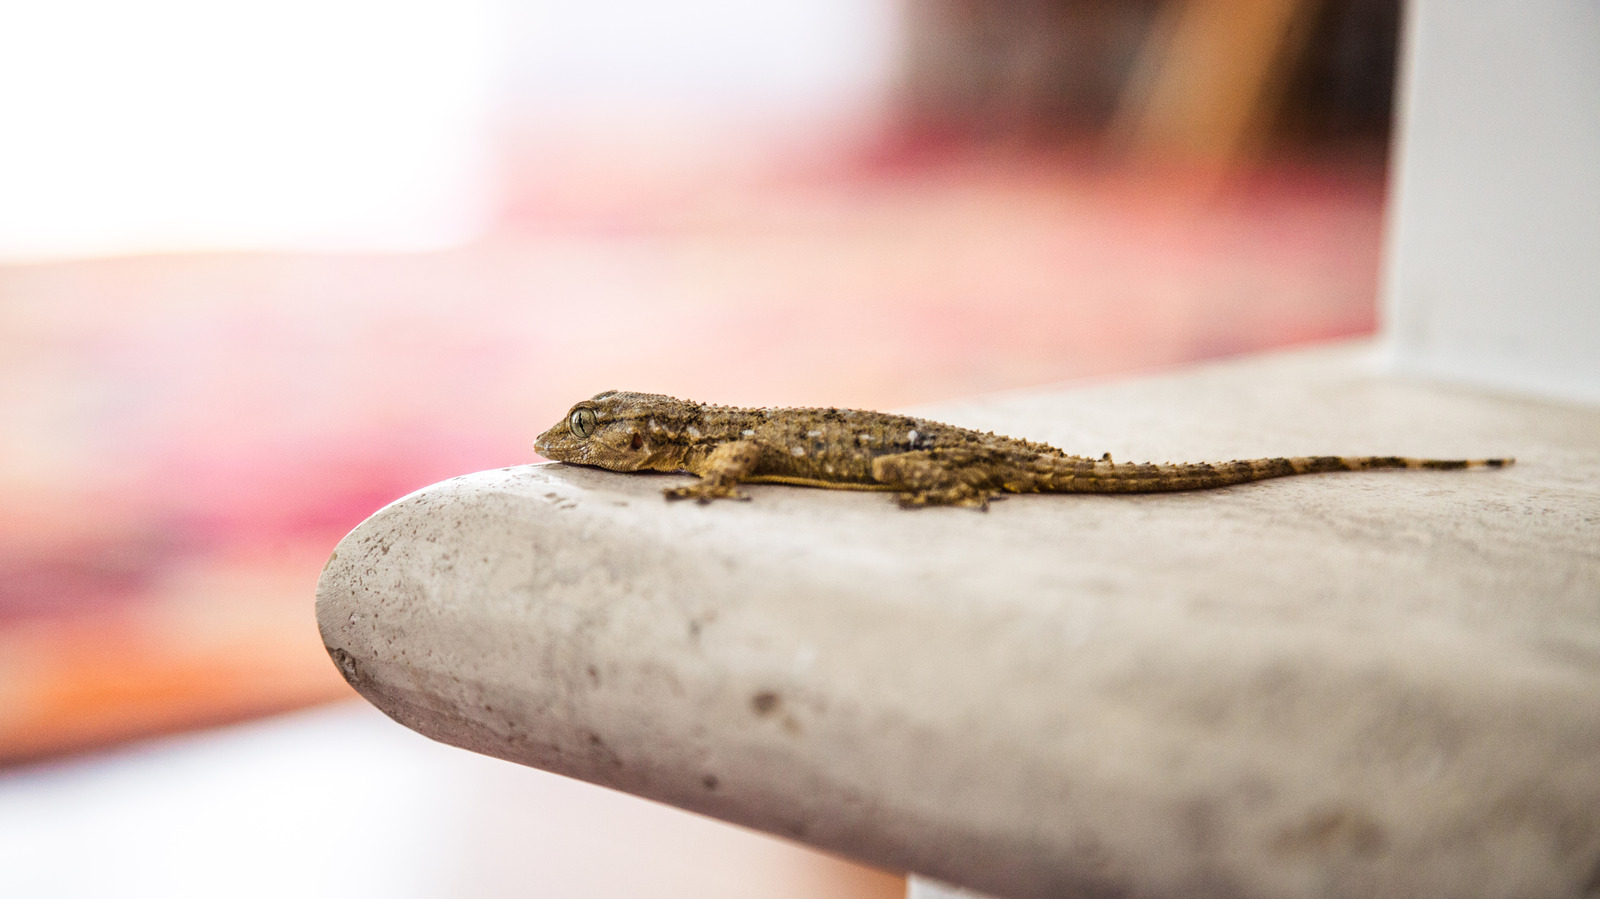 Can Cinnamon Really Keep Lizards Out Of The House?